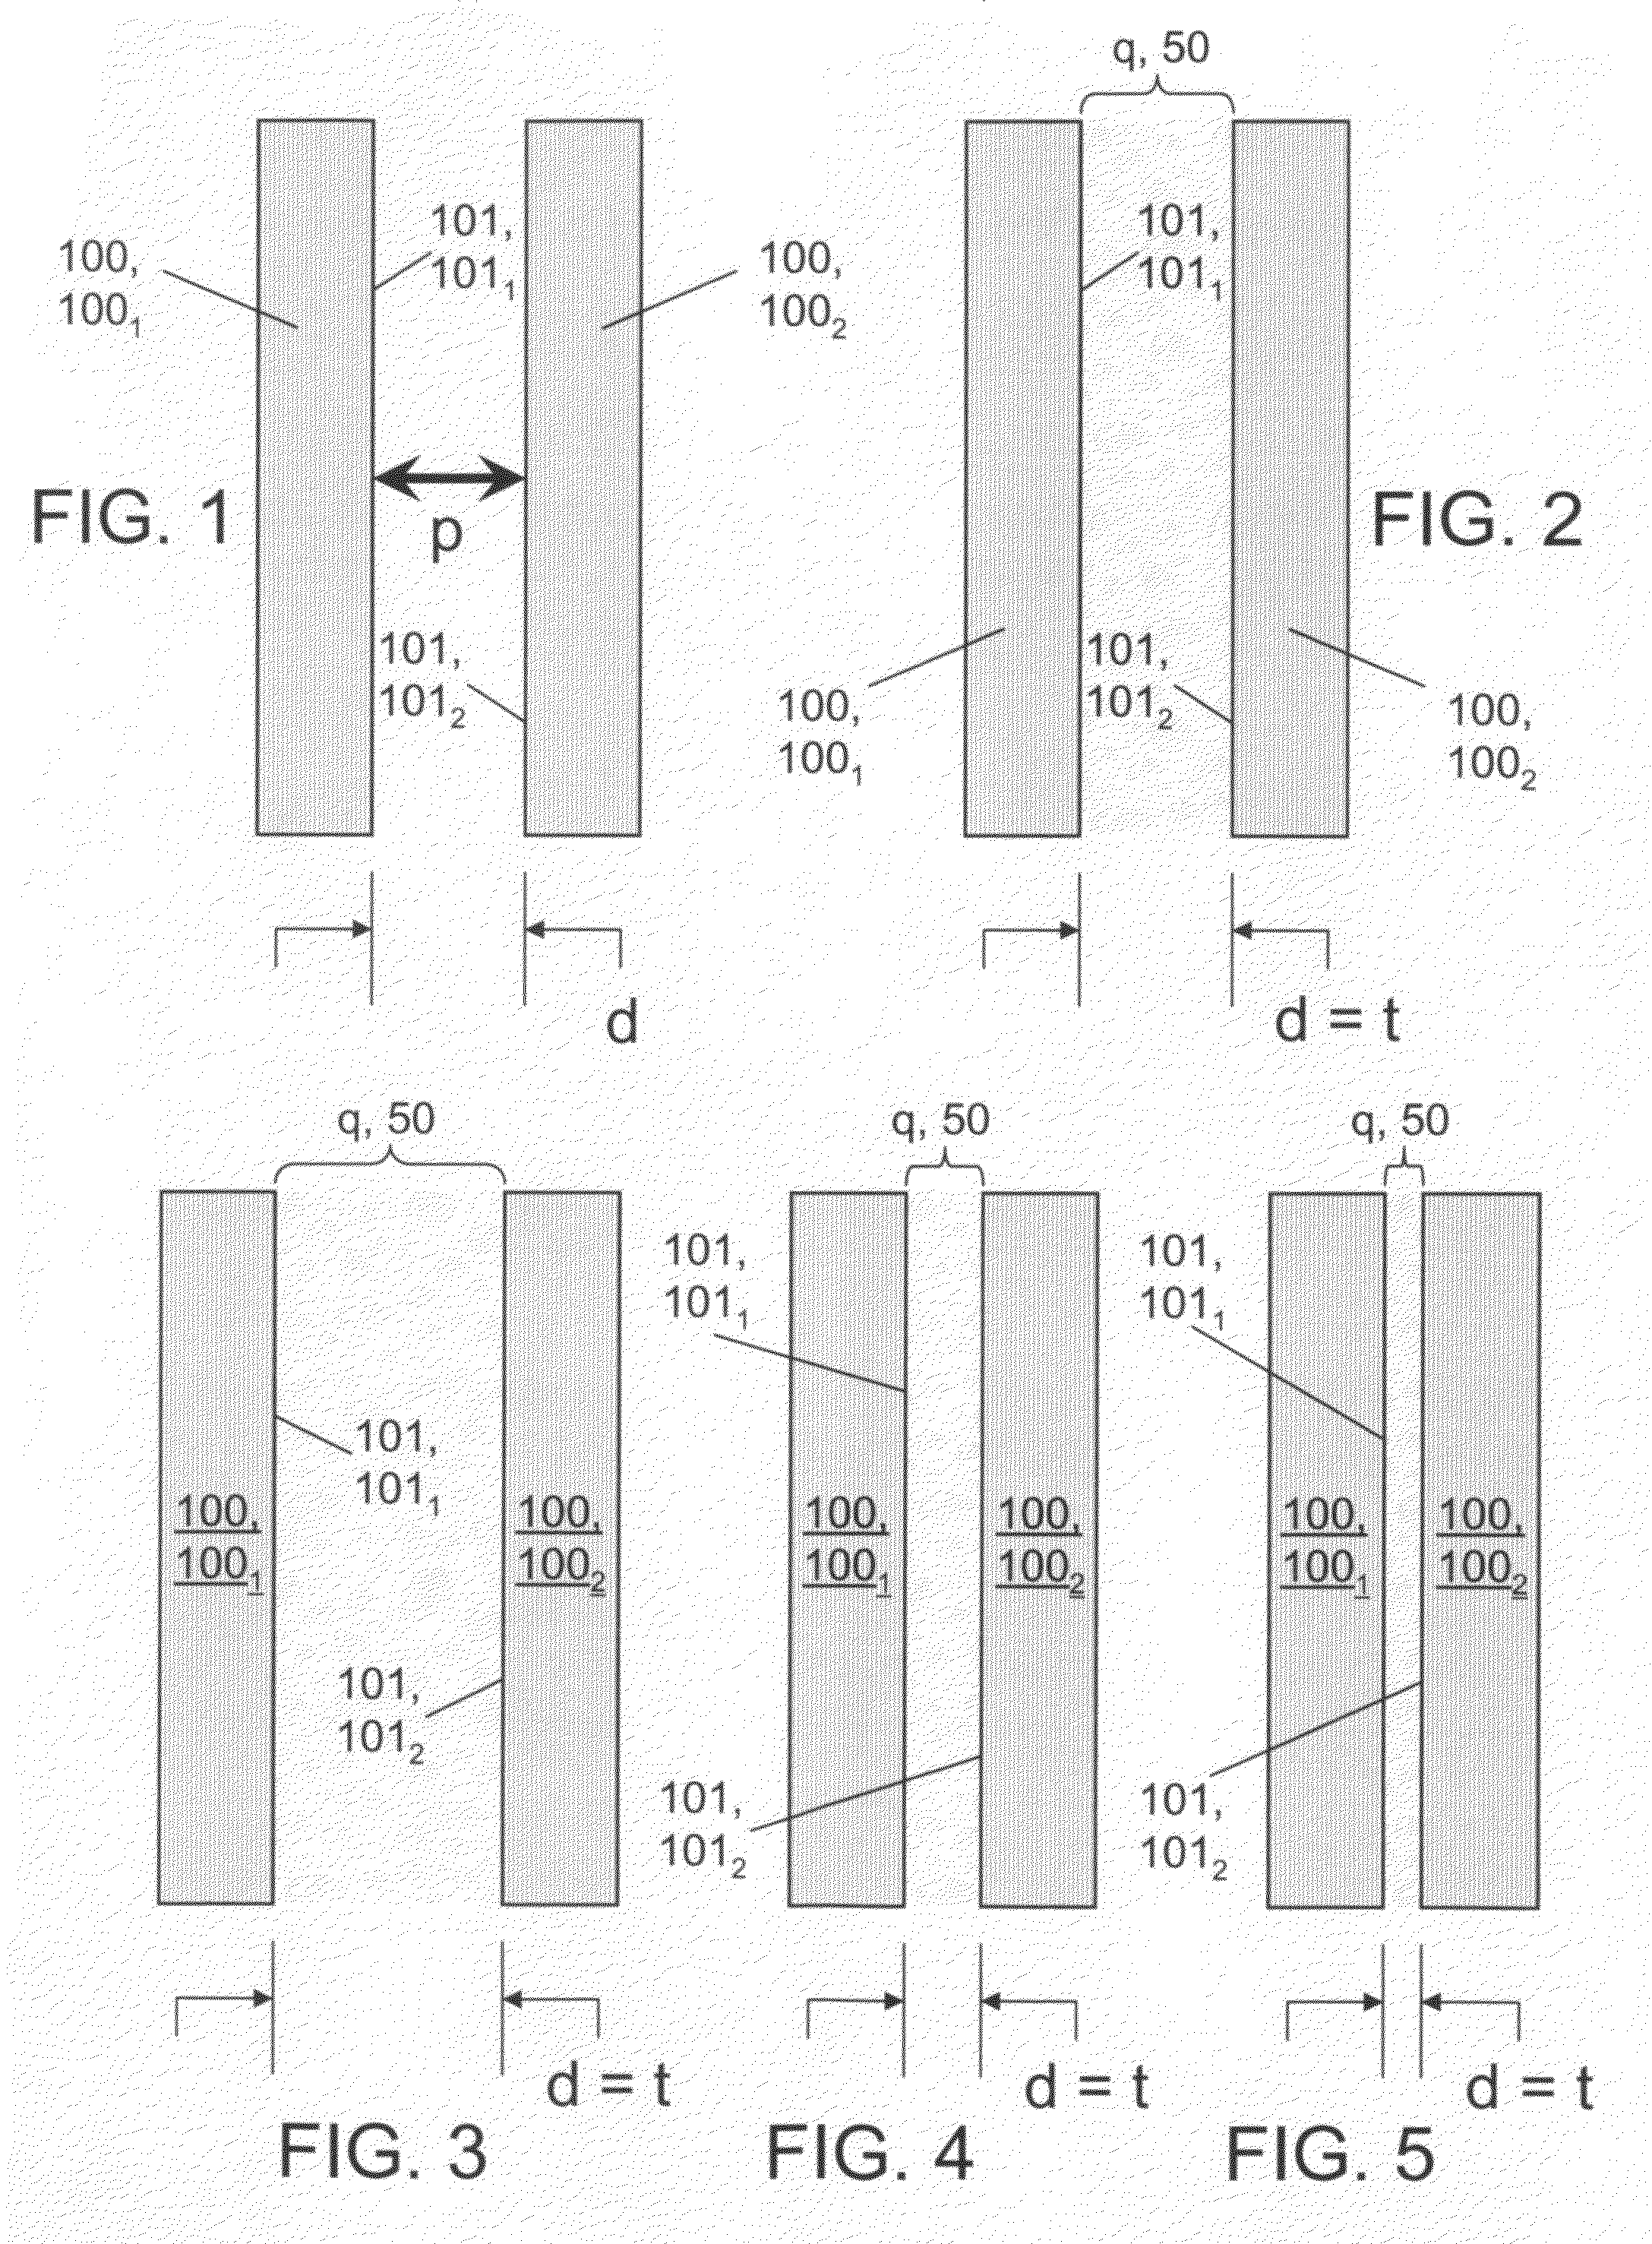 Method and apparatus for measuring electrical impedance of thin fluid films